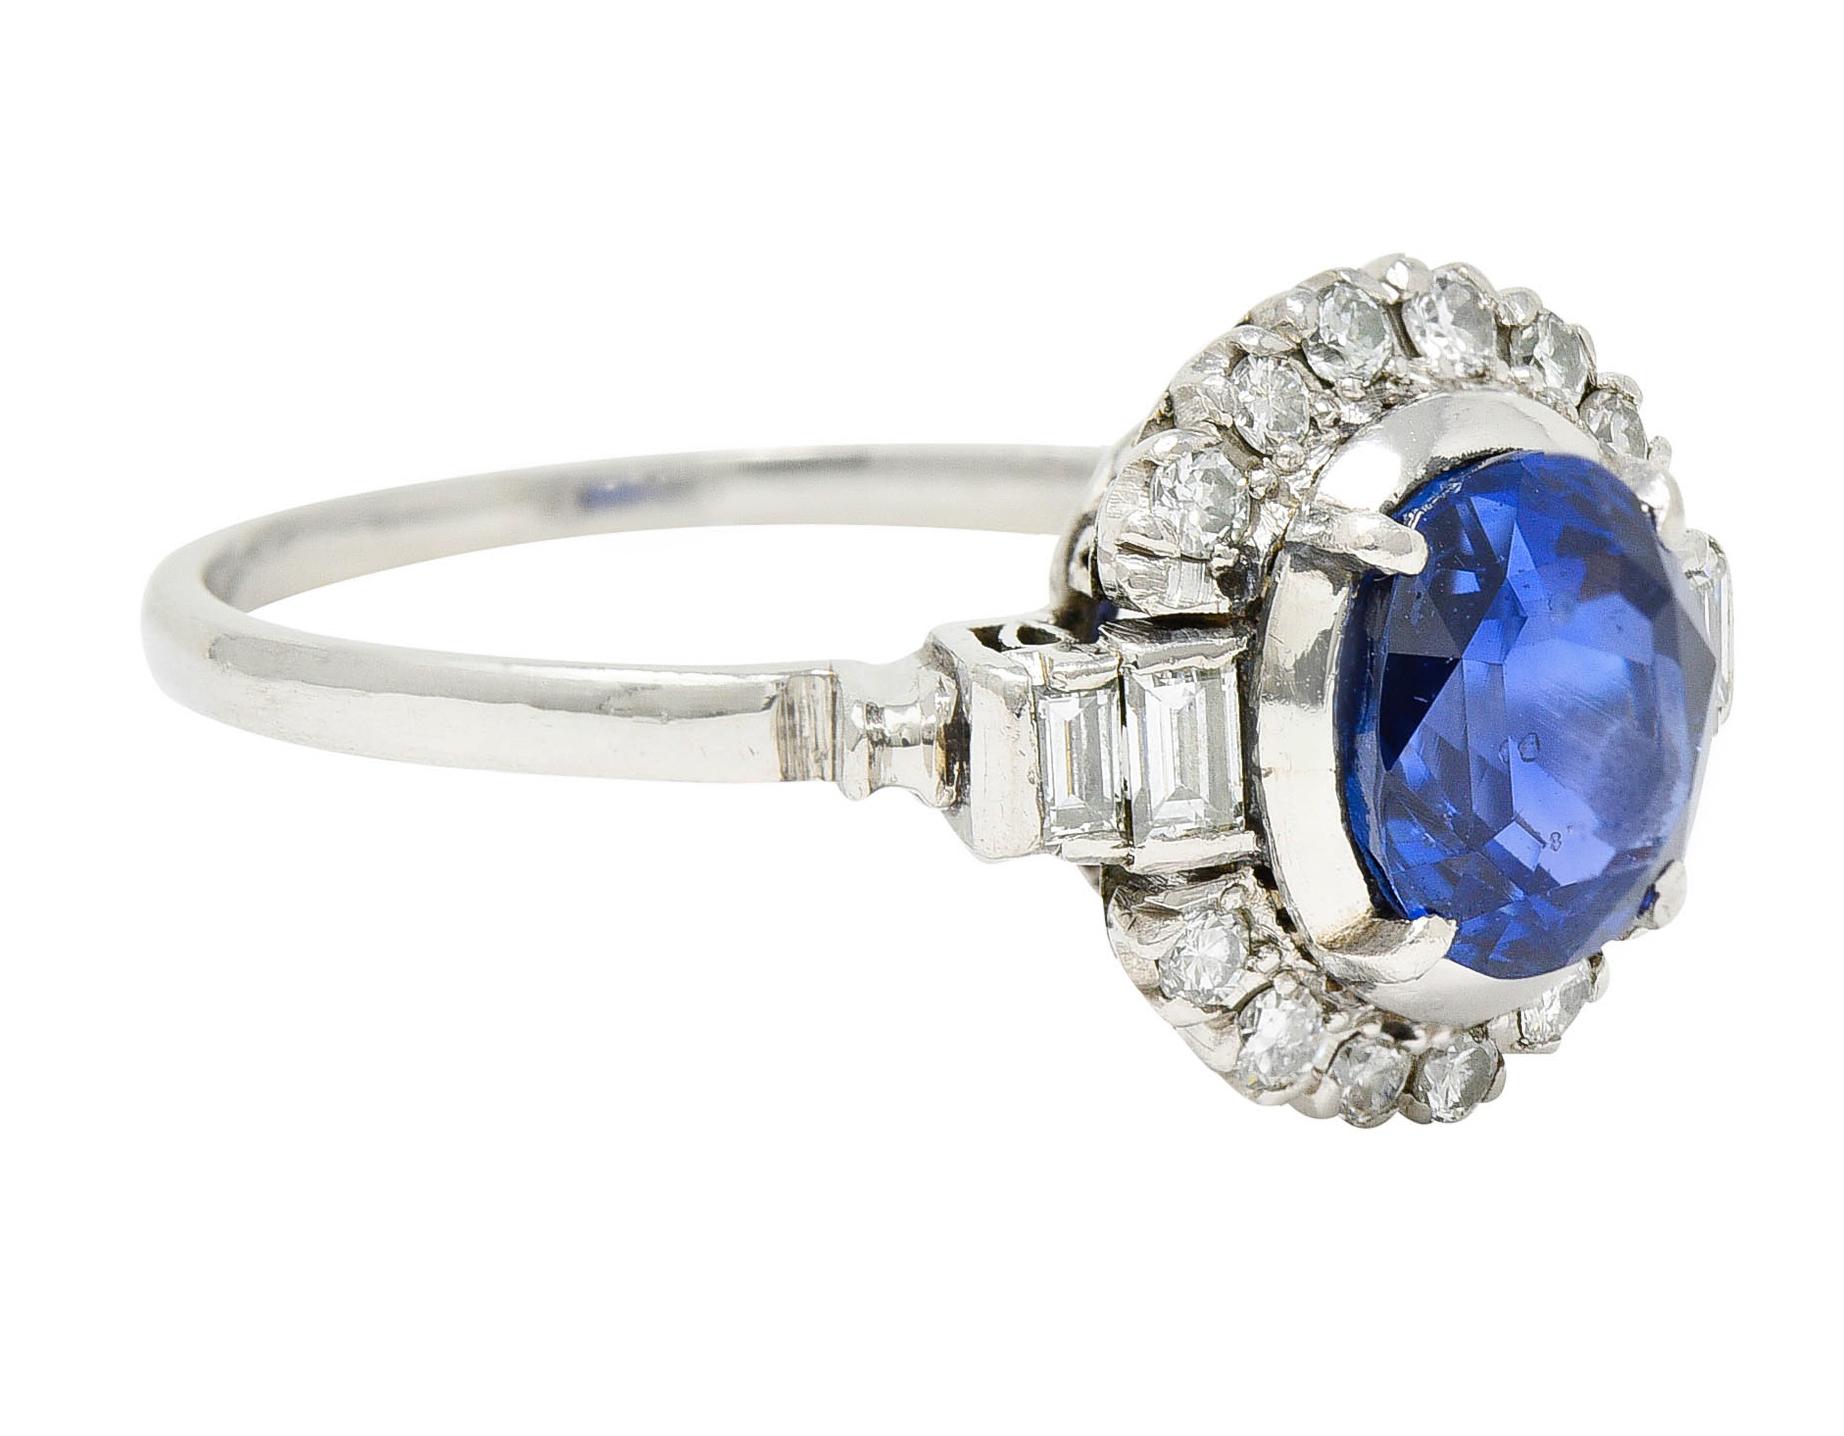 Cluster ring centers an oval cut Burmese sapphire weighing 2.04 carats

Vibrant and uniform royal blue color with no indications of heat

Flanked by stepped shoulders bar set with rectangular step cut diamonds

With a partial round brilliant cut